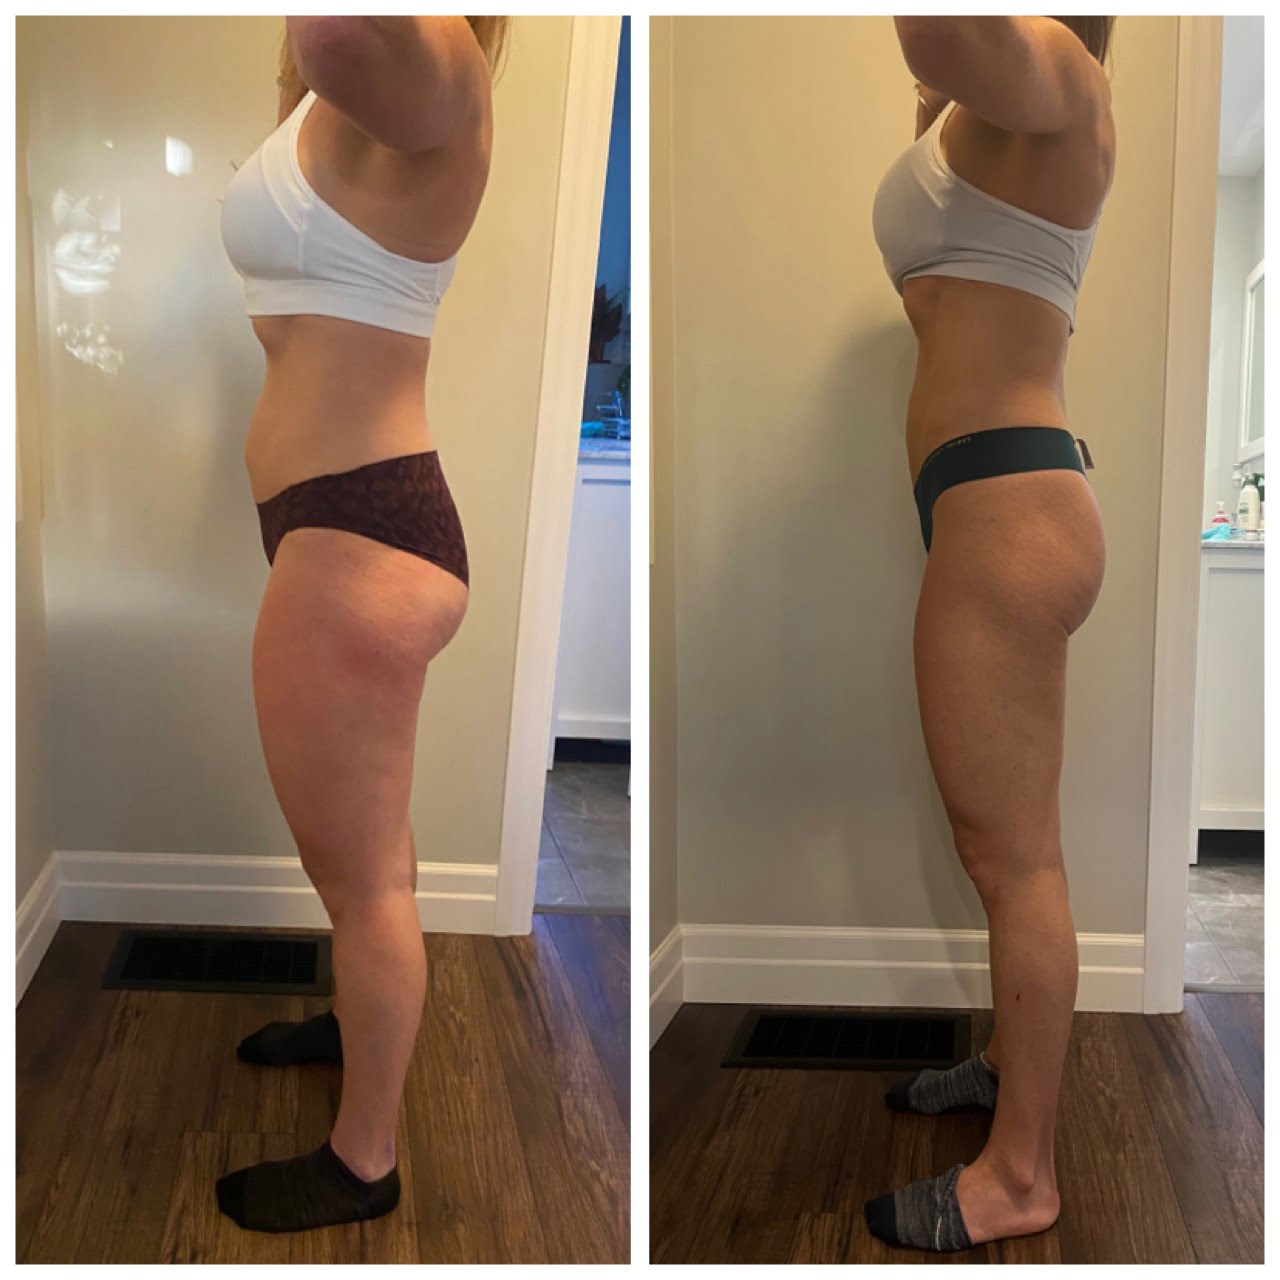 Shannon is working with a MacroNutrition Coach to tone her body